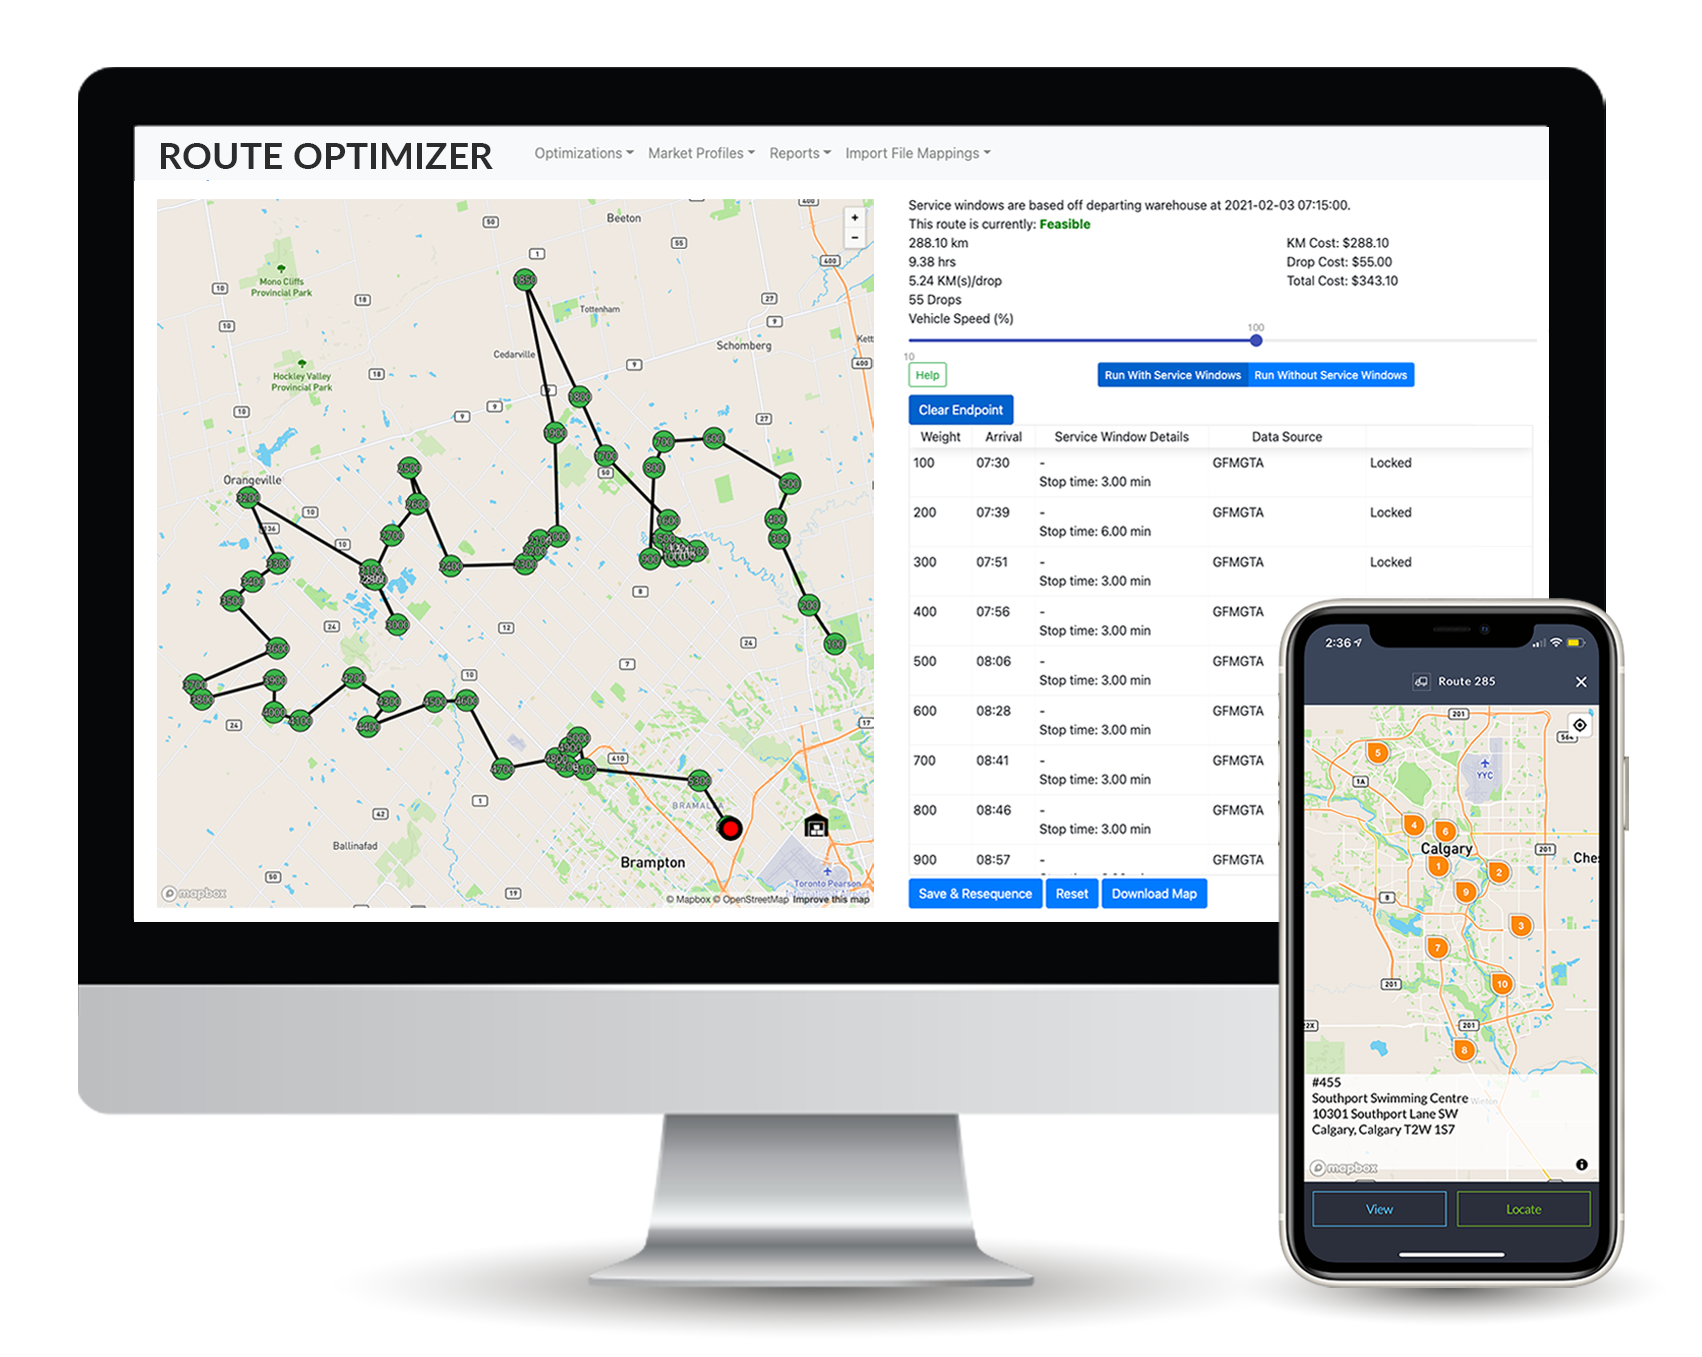 Route Optimization - Make delivery up to 20% faster by creating the most efficient routes. Routeique saves drivers' time, reduces fuel costs, and reduces wear on vehicles.